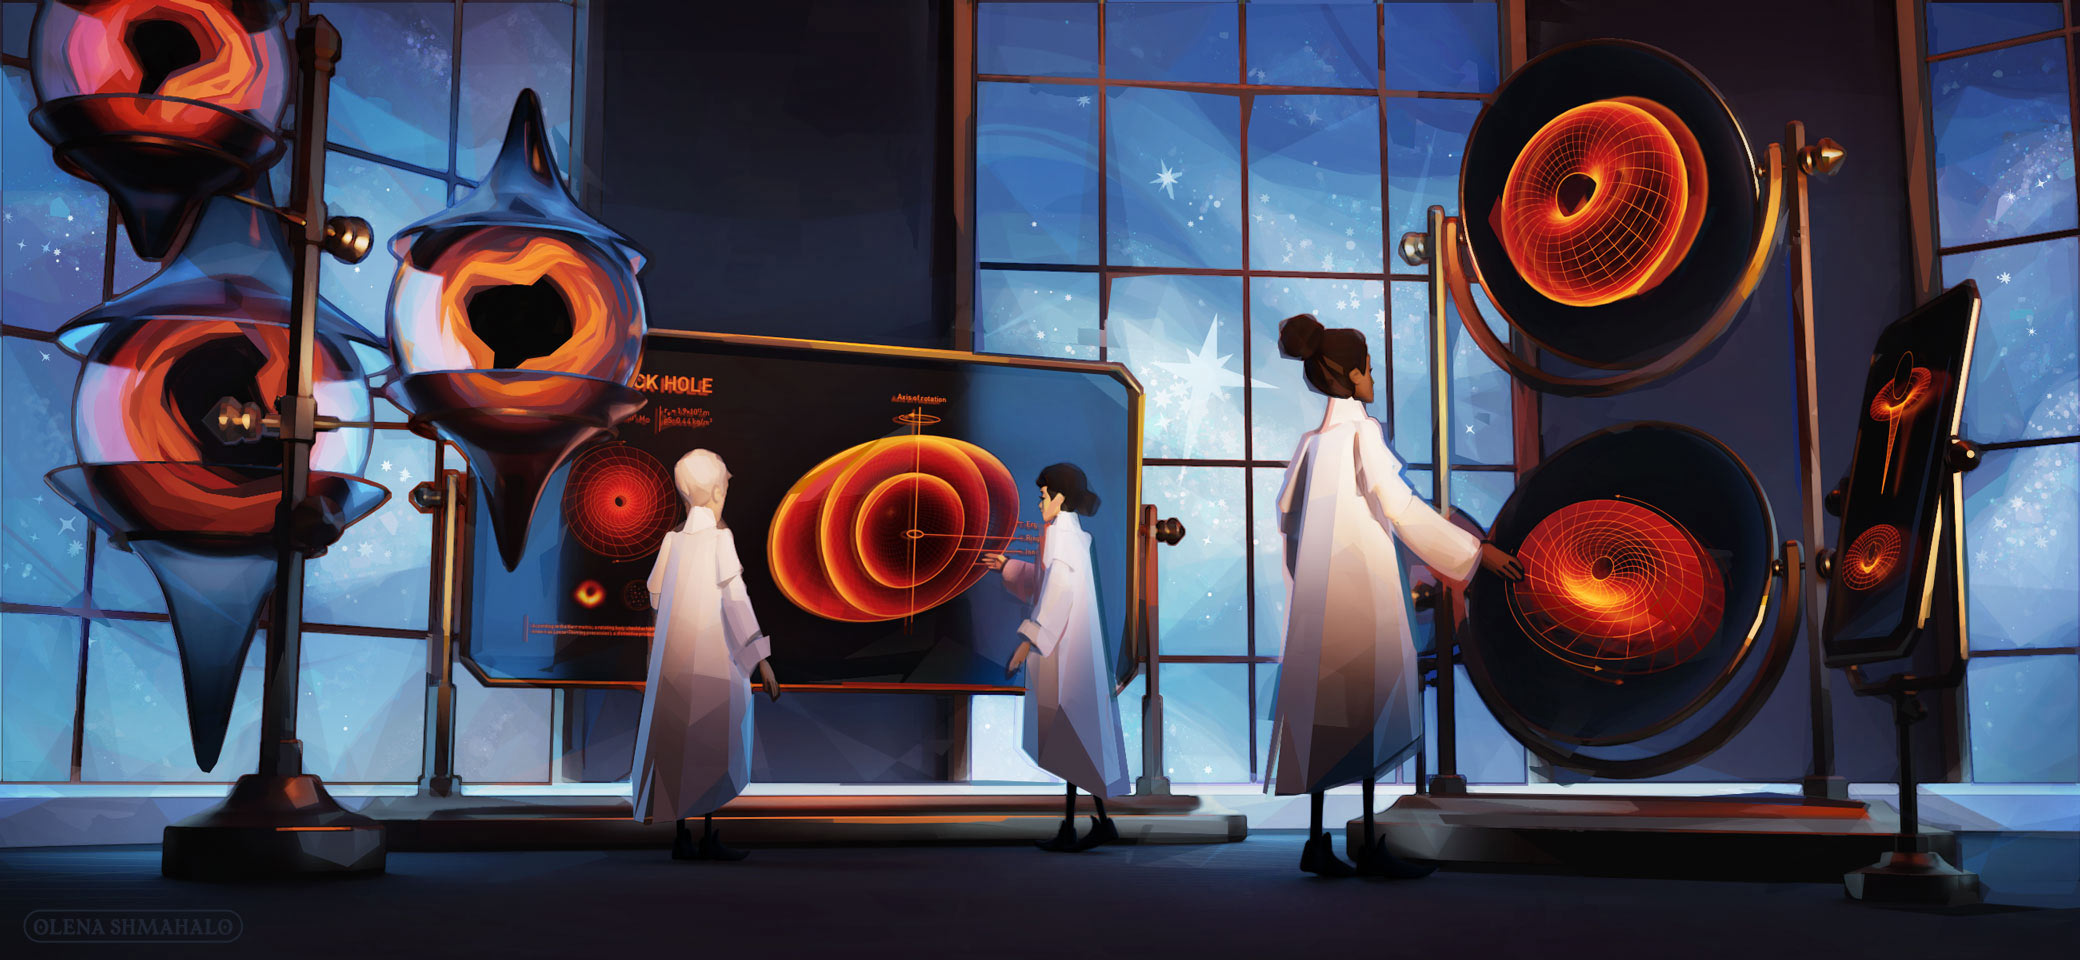 Painting of a black hole laboratory in a retro-futuristic style. Researchers observe glass screens displaying black hole graphics in orange.